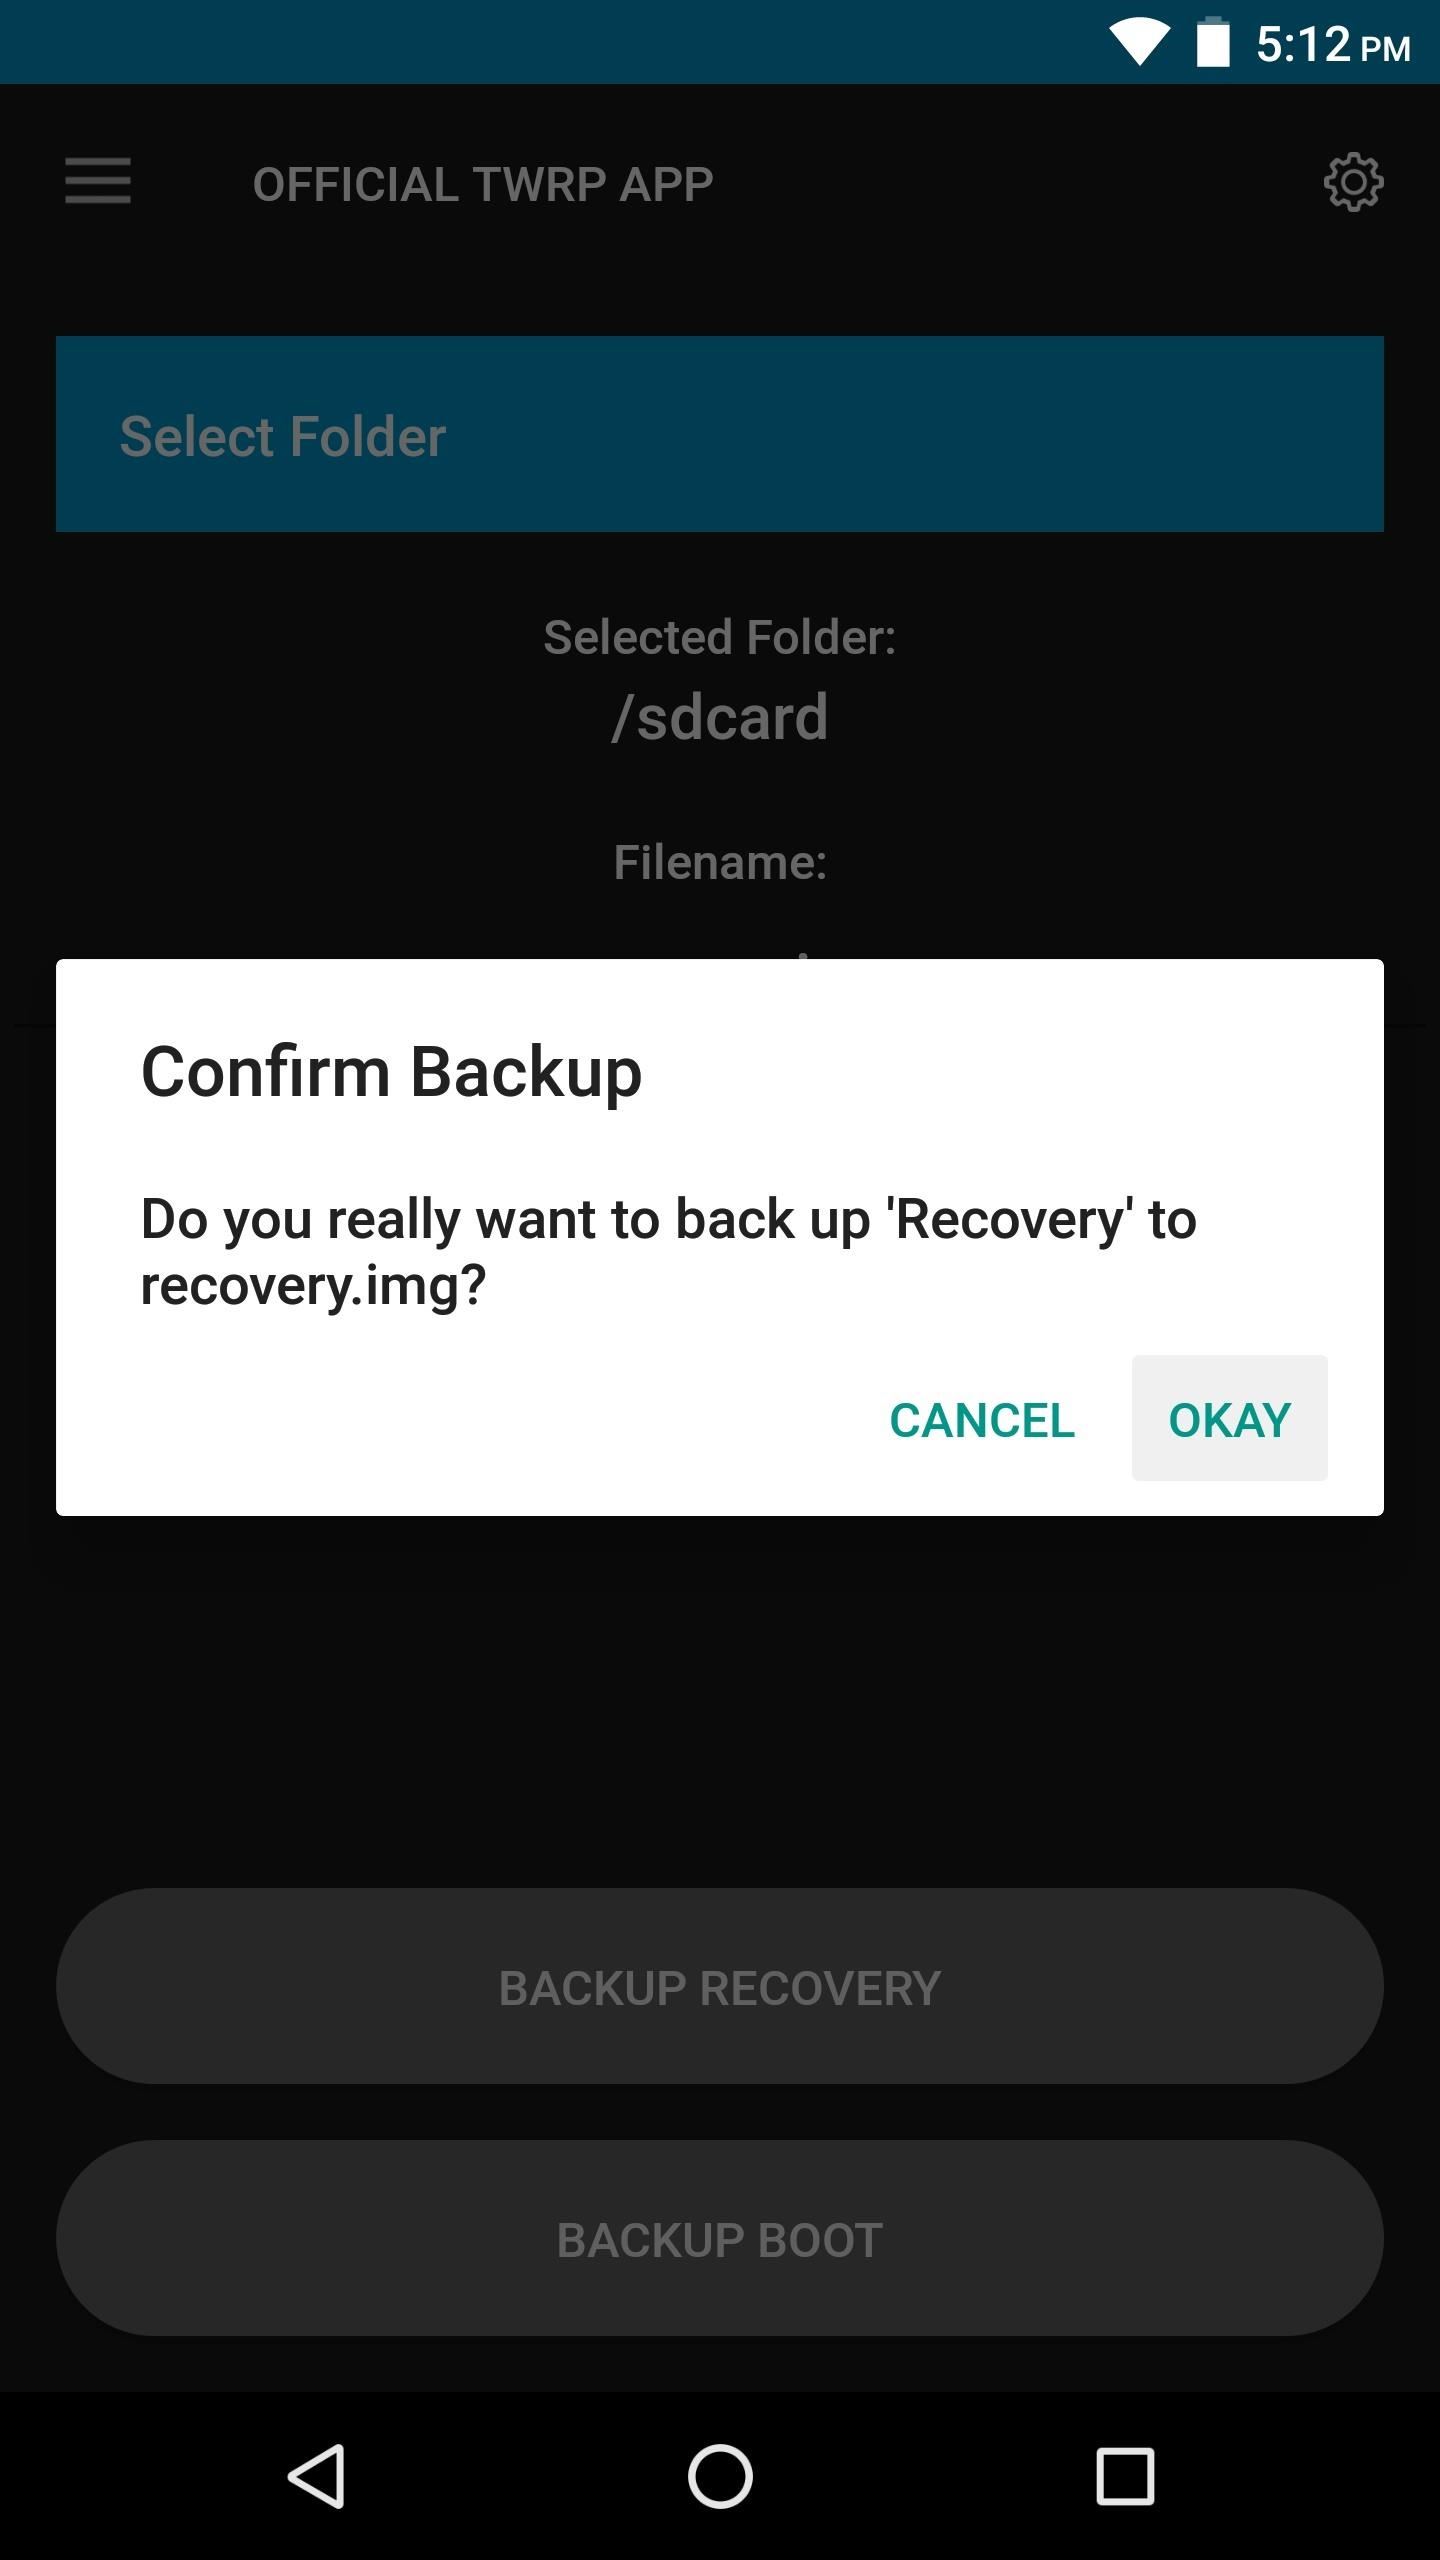 TWRP 101: How to Install the Best Custom Recovery for Android